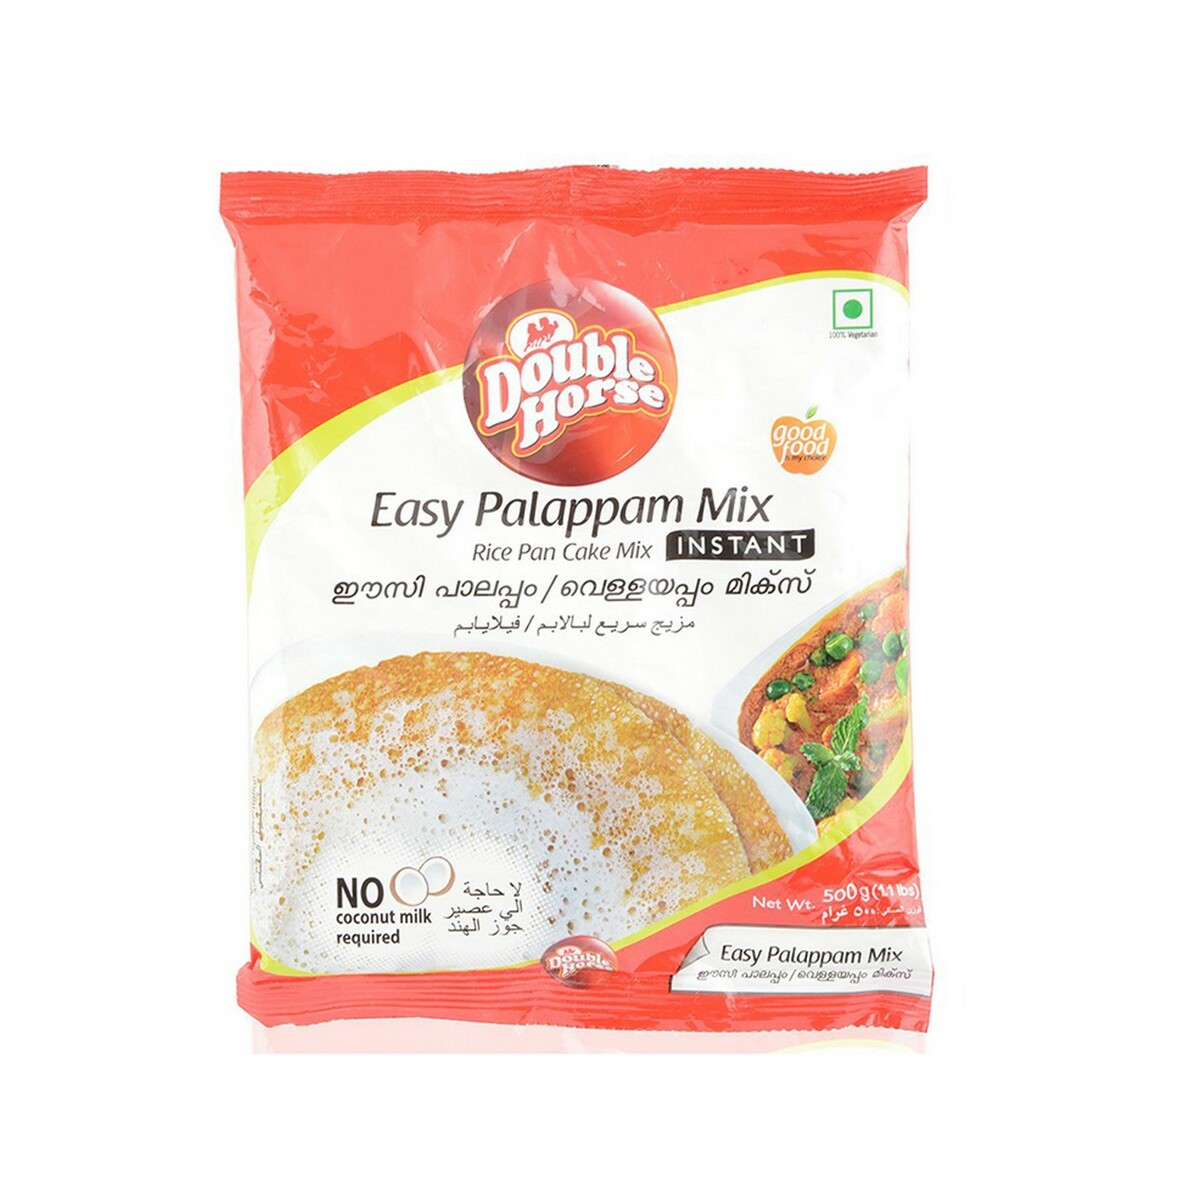 Double Horse Easy Palappam Mix 500g